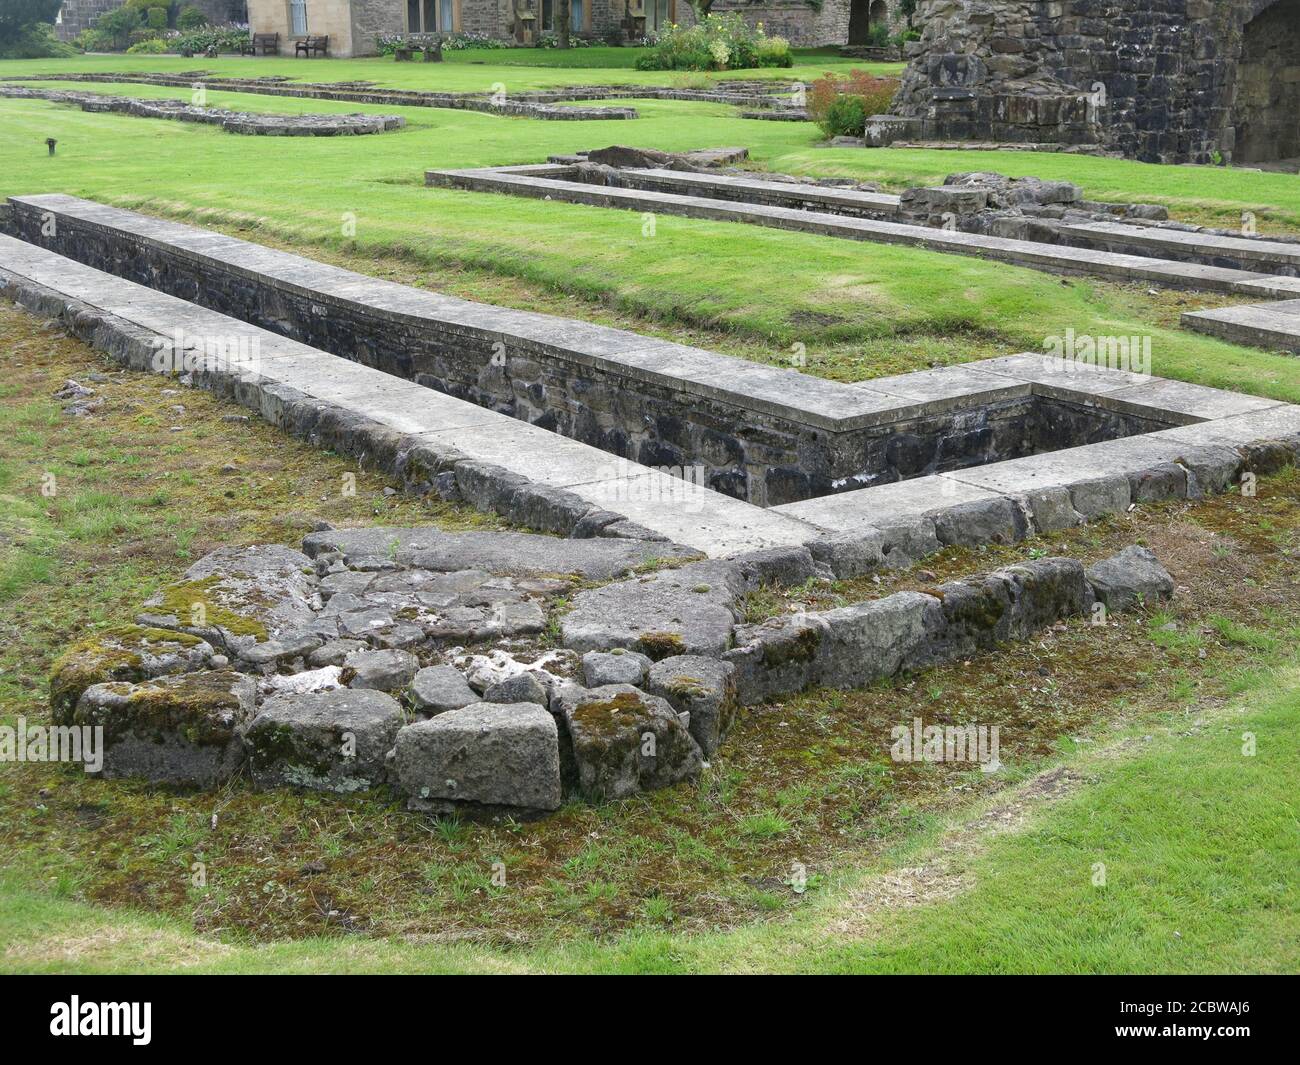 The foundations of the only surviving choir pits in Britain, stone-lined trenches in the ruins of Whalley Abbey, a 14th century Cistercian Monastery. Stock Photo